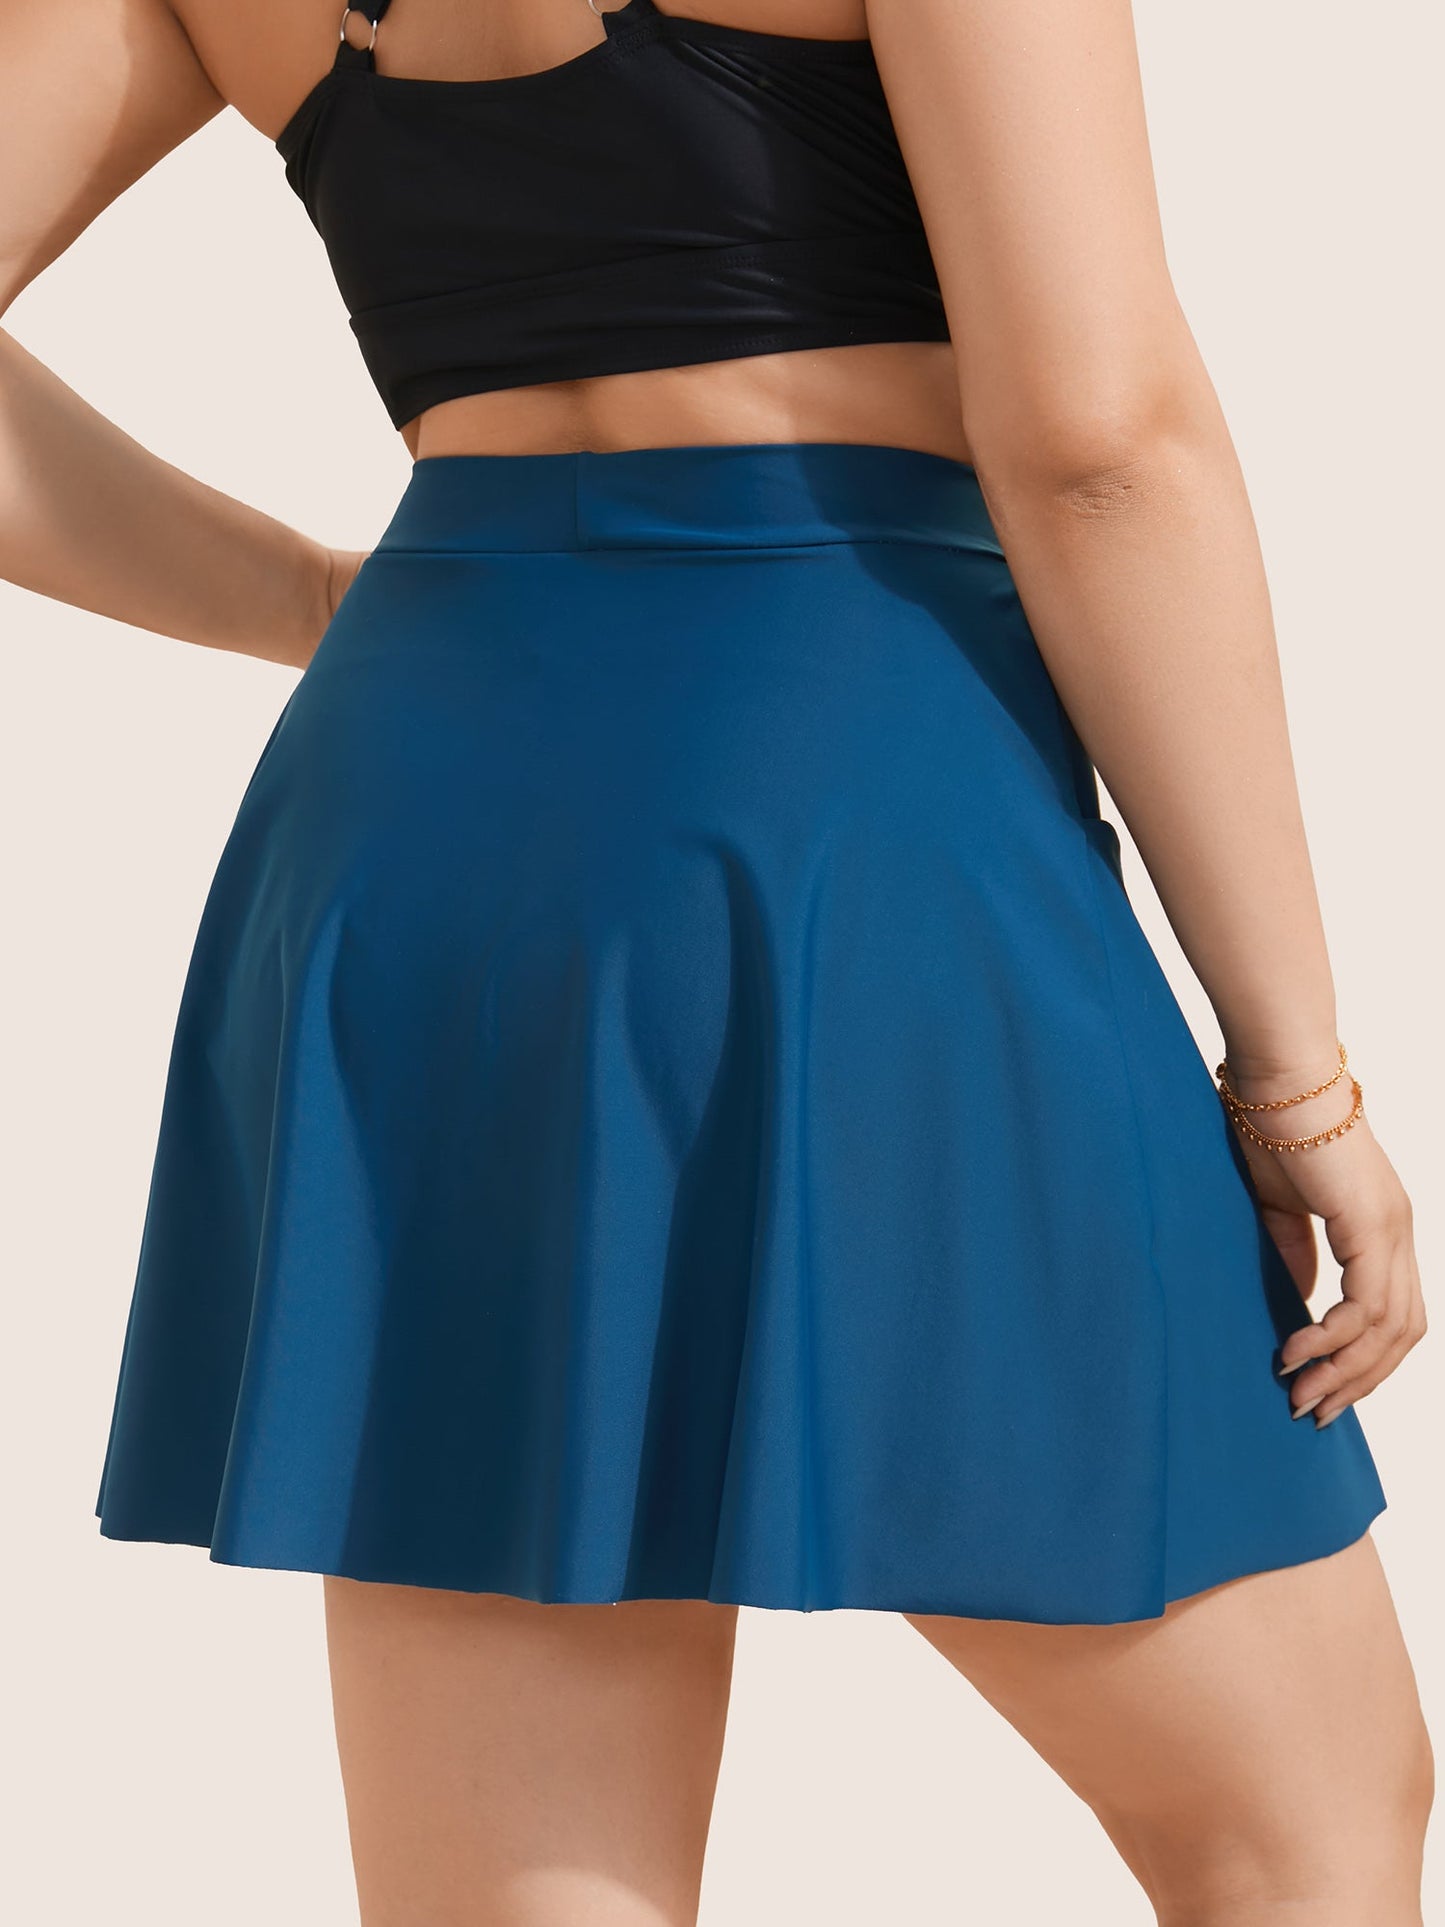 Solid Patched Pocket Side Pleated Swim Skirt